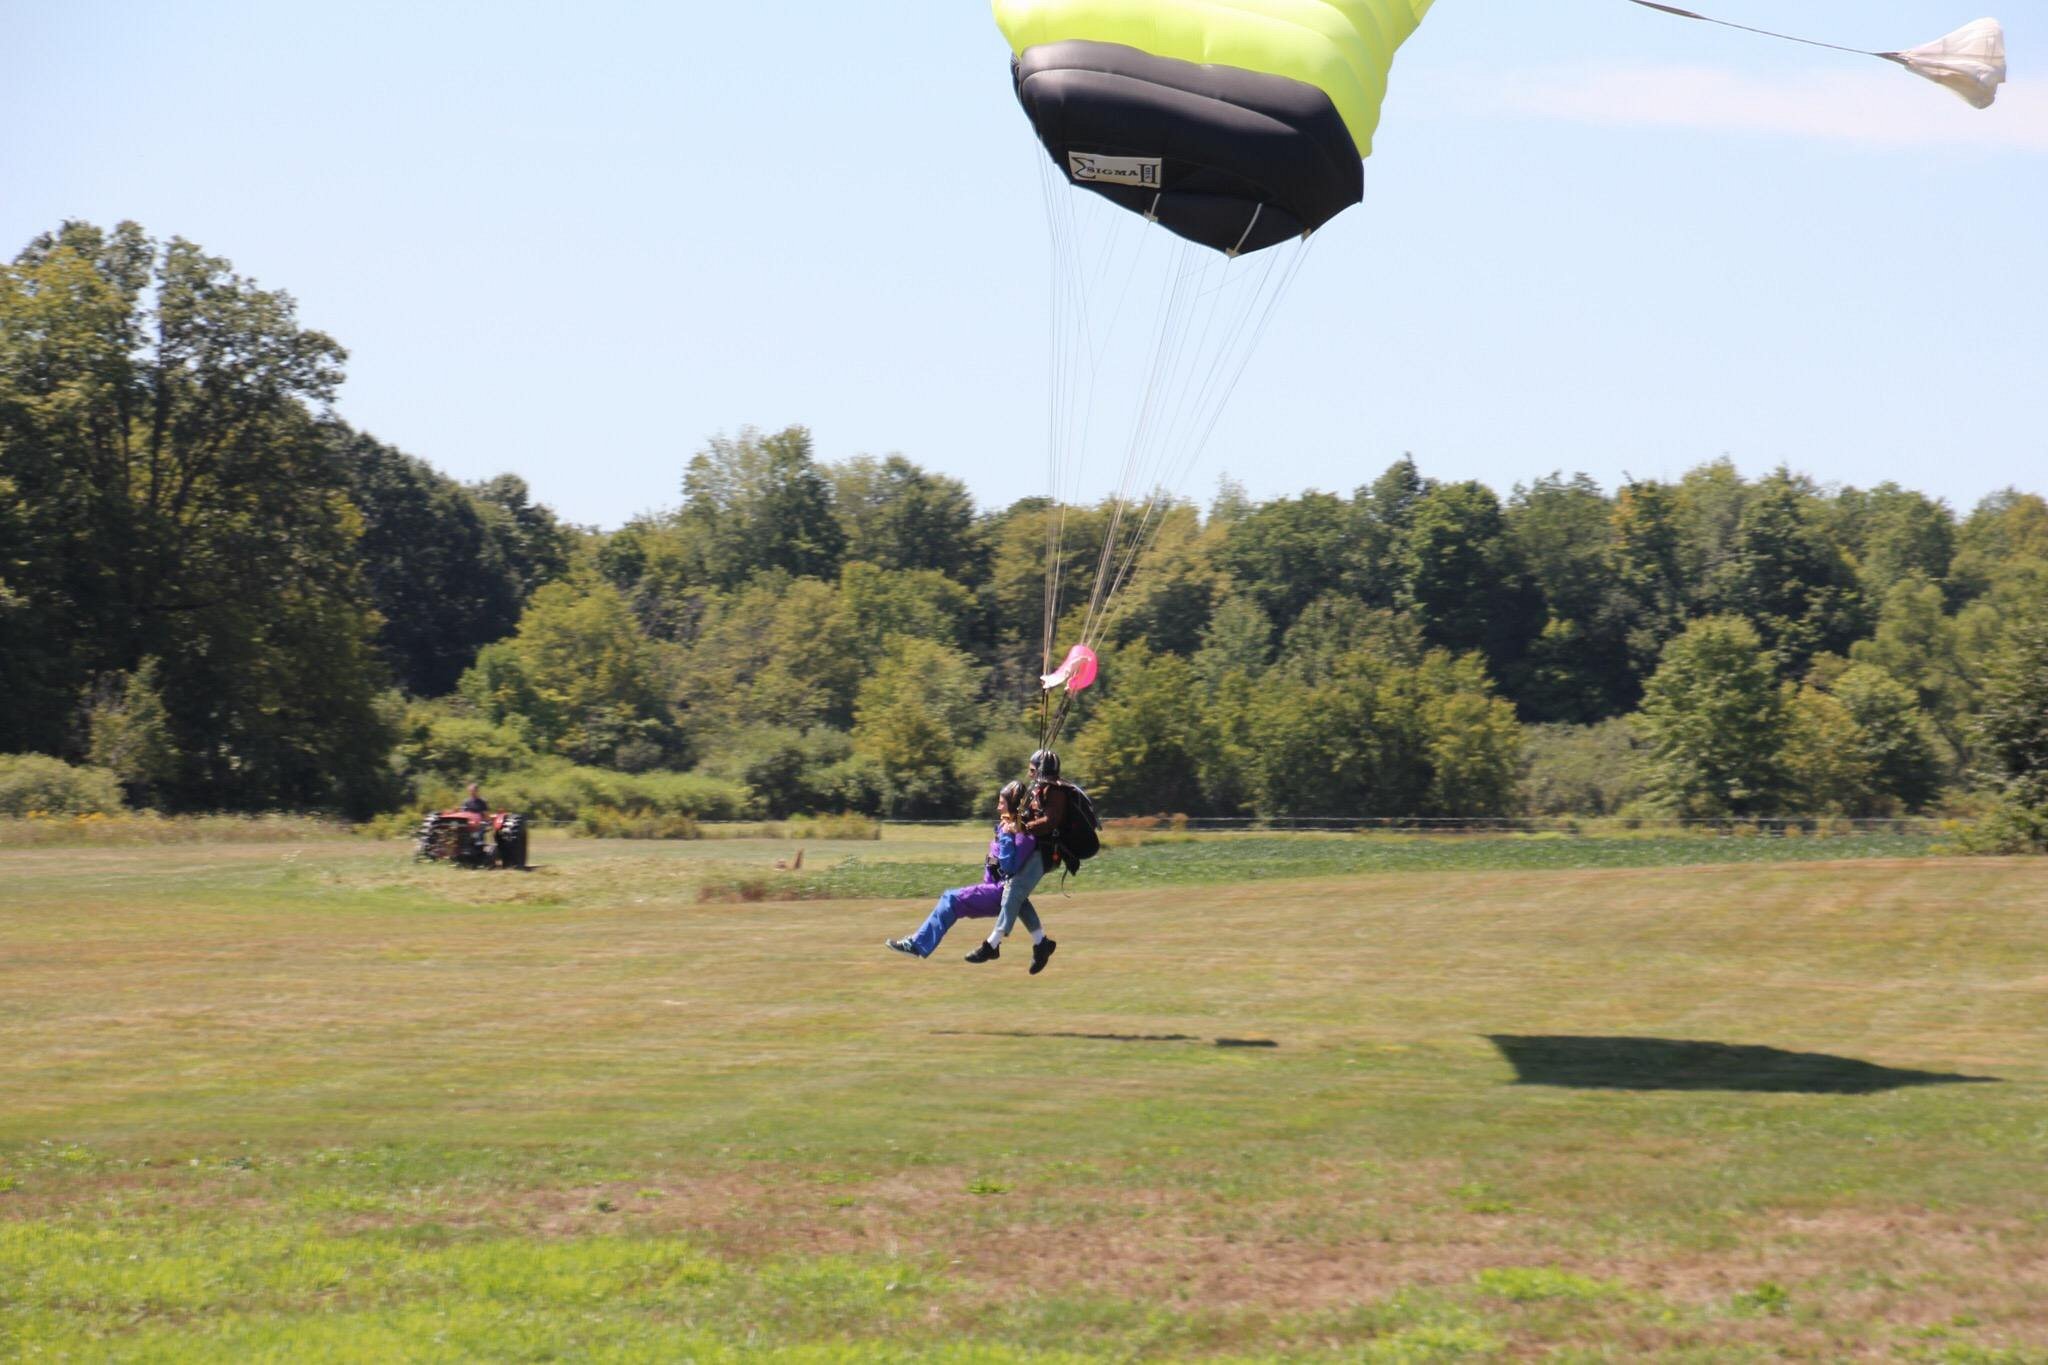 Cleveland Skydiving Center (Garrettsville) All You Need to Know